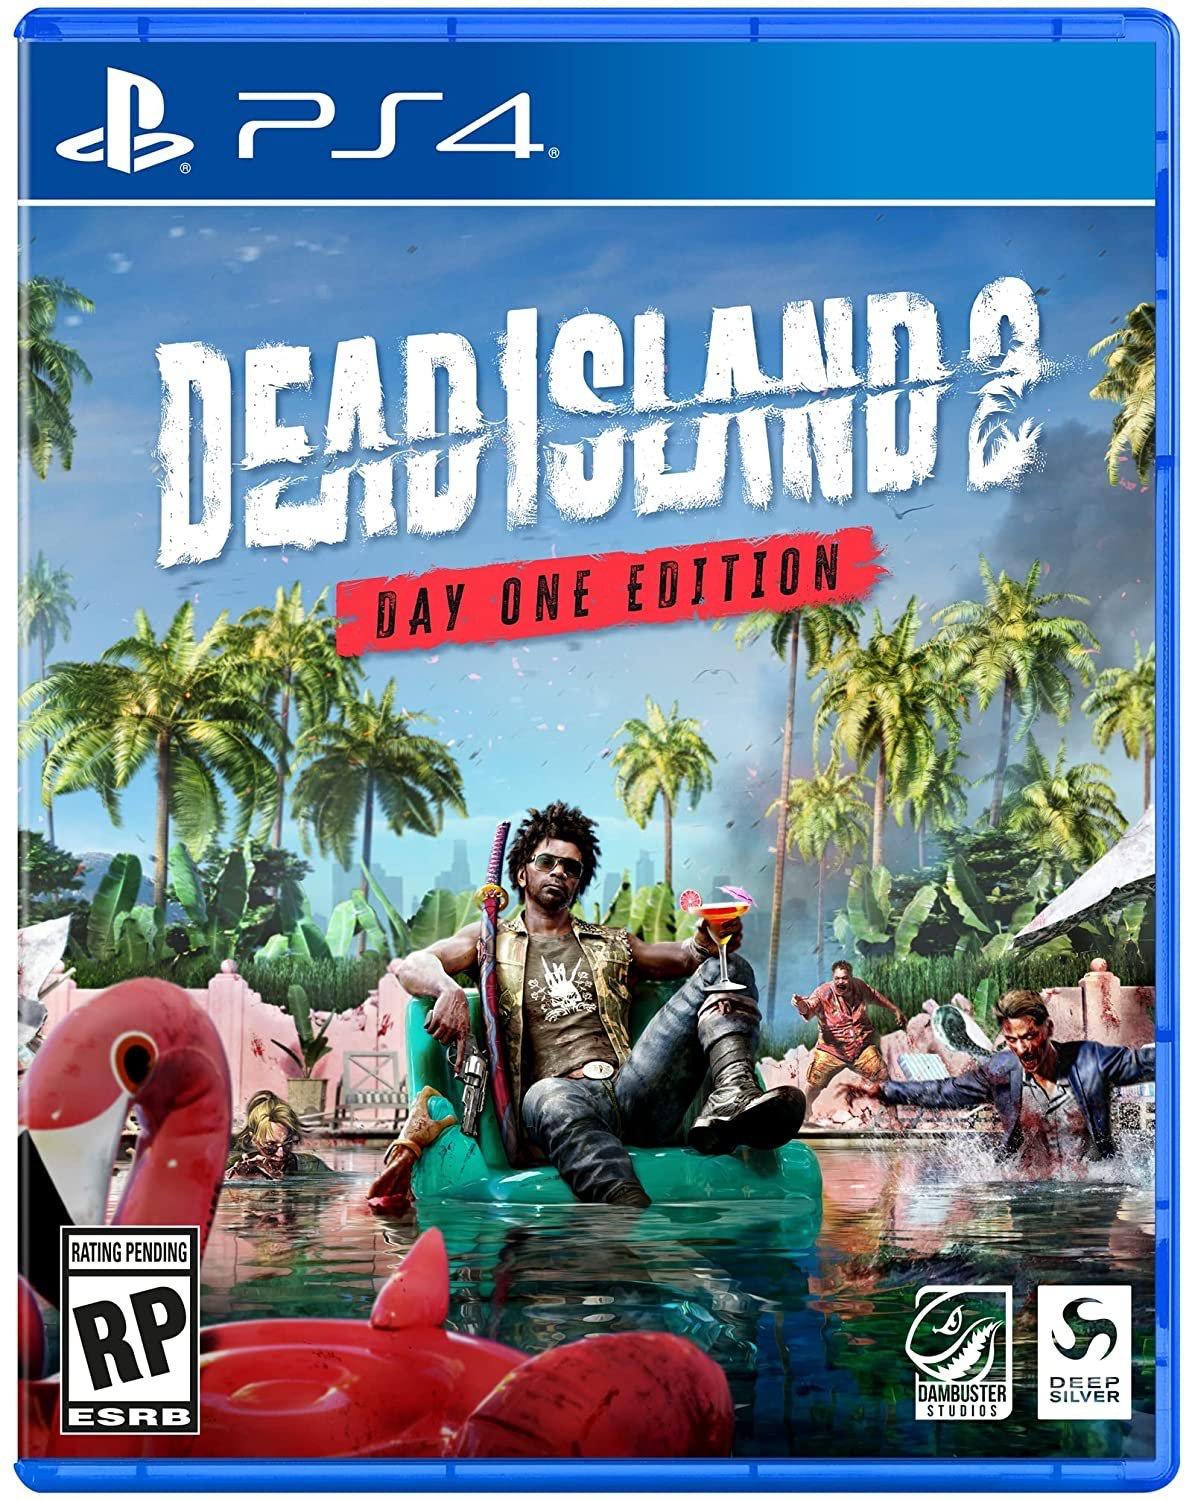 %name Dead Island 2 screenshots, boxart and details leaked on Amazon | VGLeaks 2.0